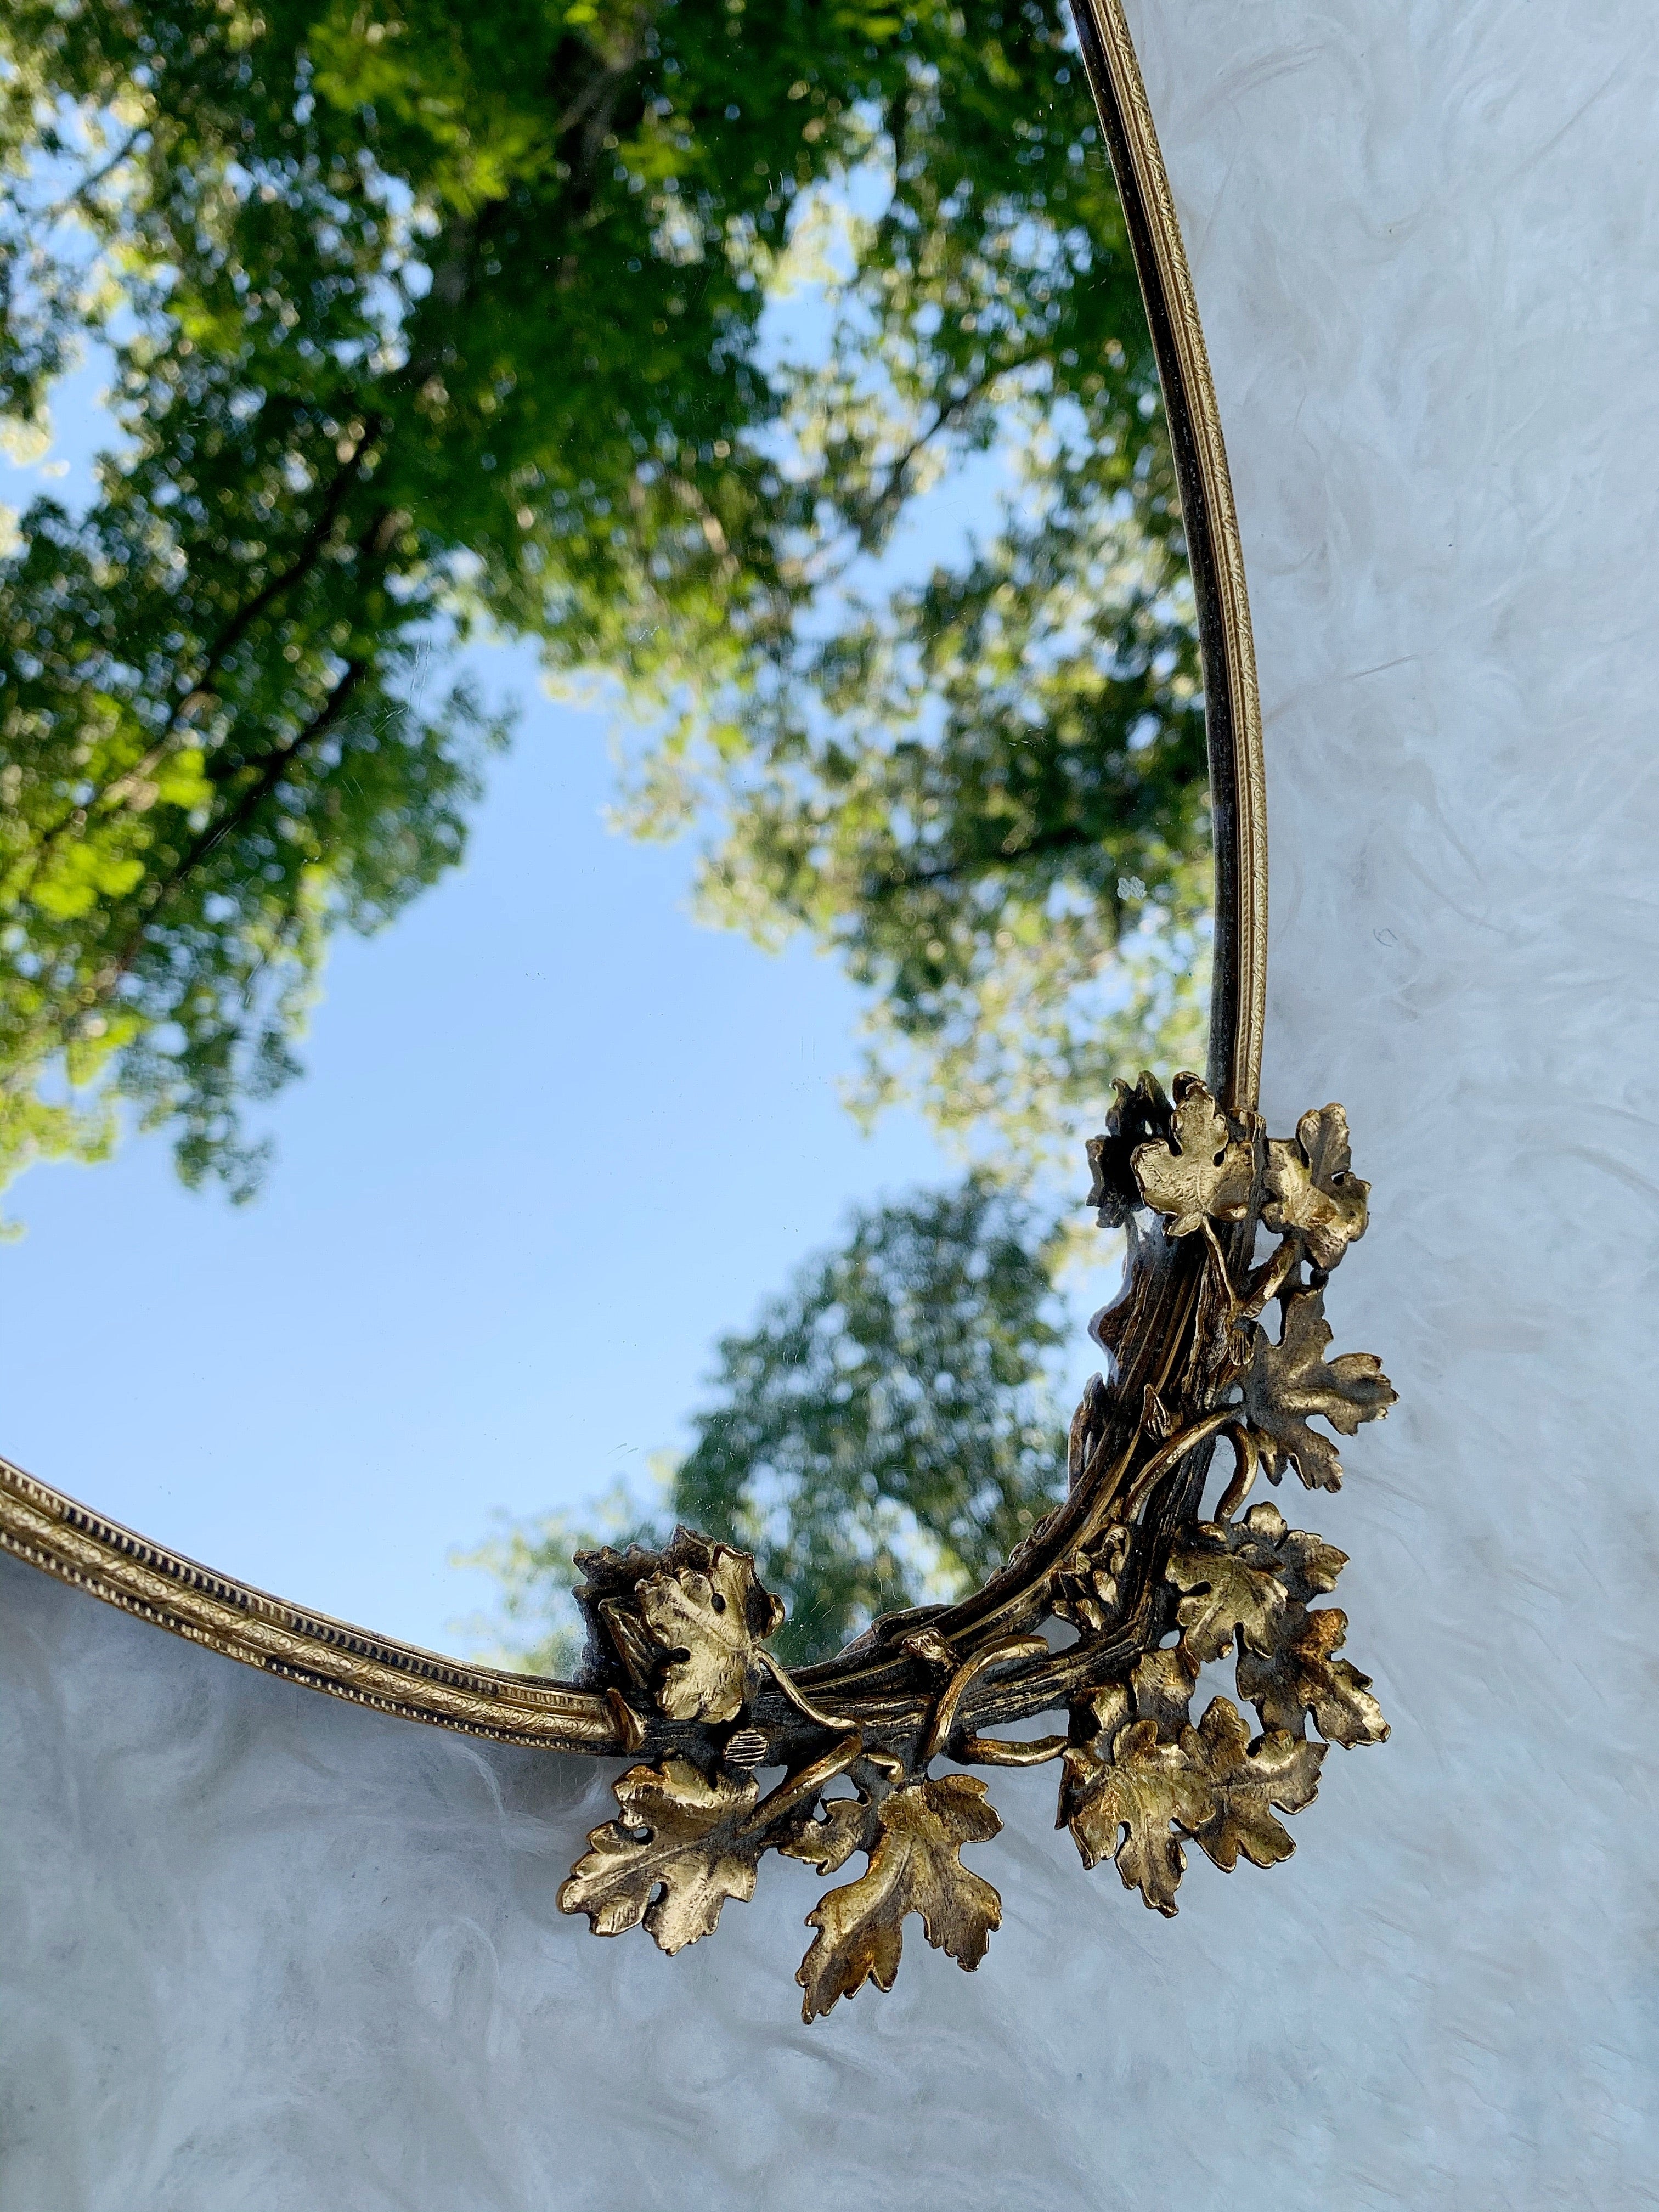 Antique Ivy Leaves Mirror Tray